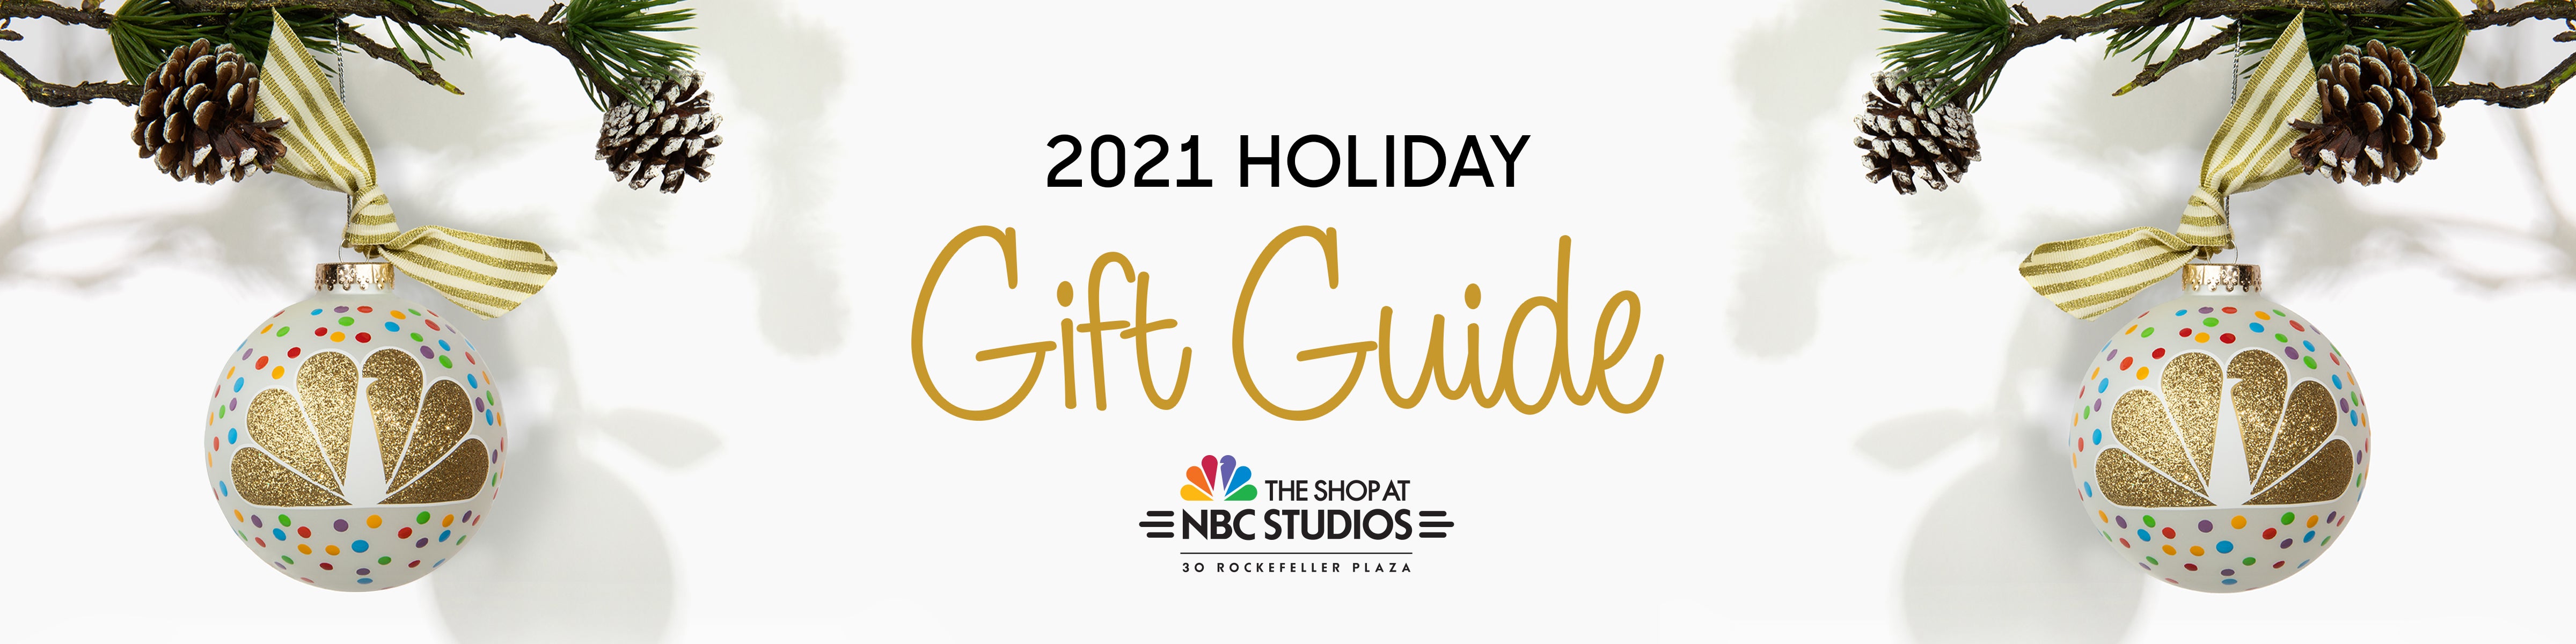 2021 Holiday Gift Guide - The Shop at NBC Studios